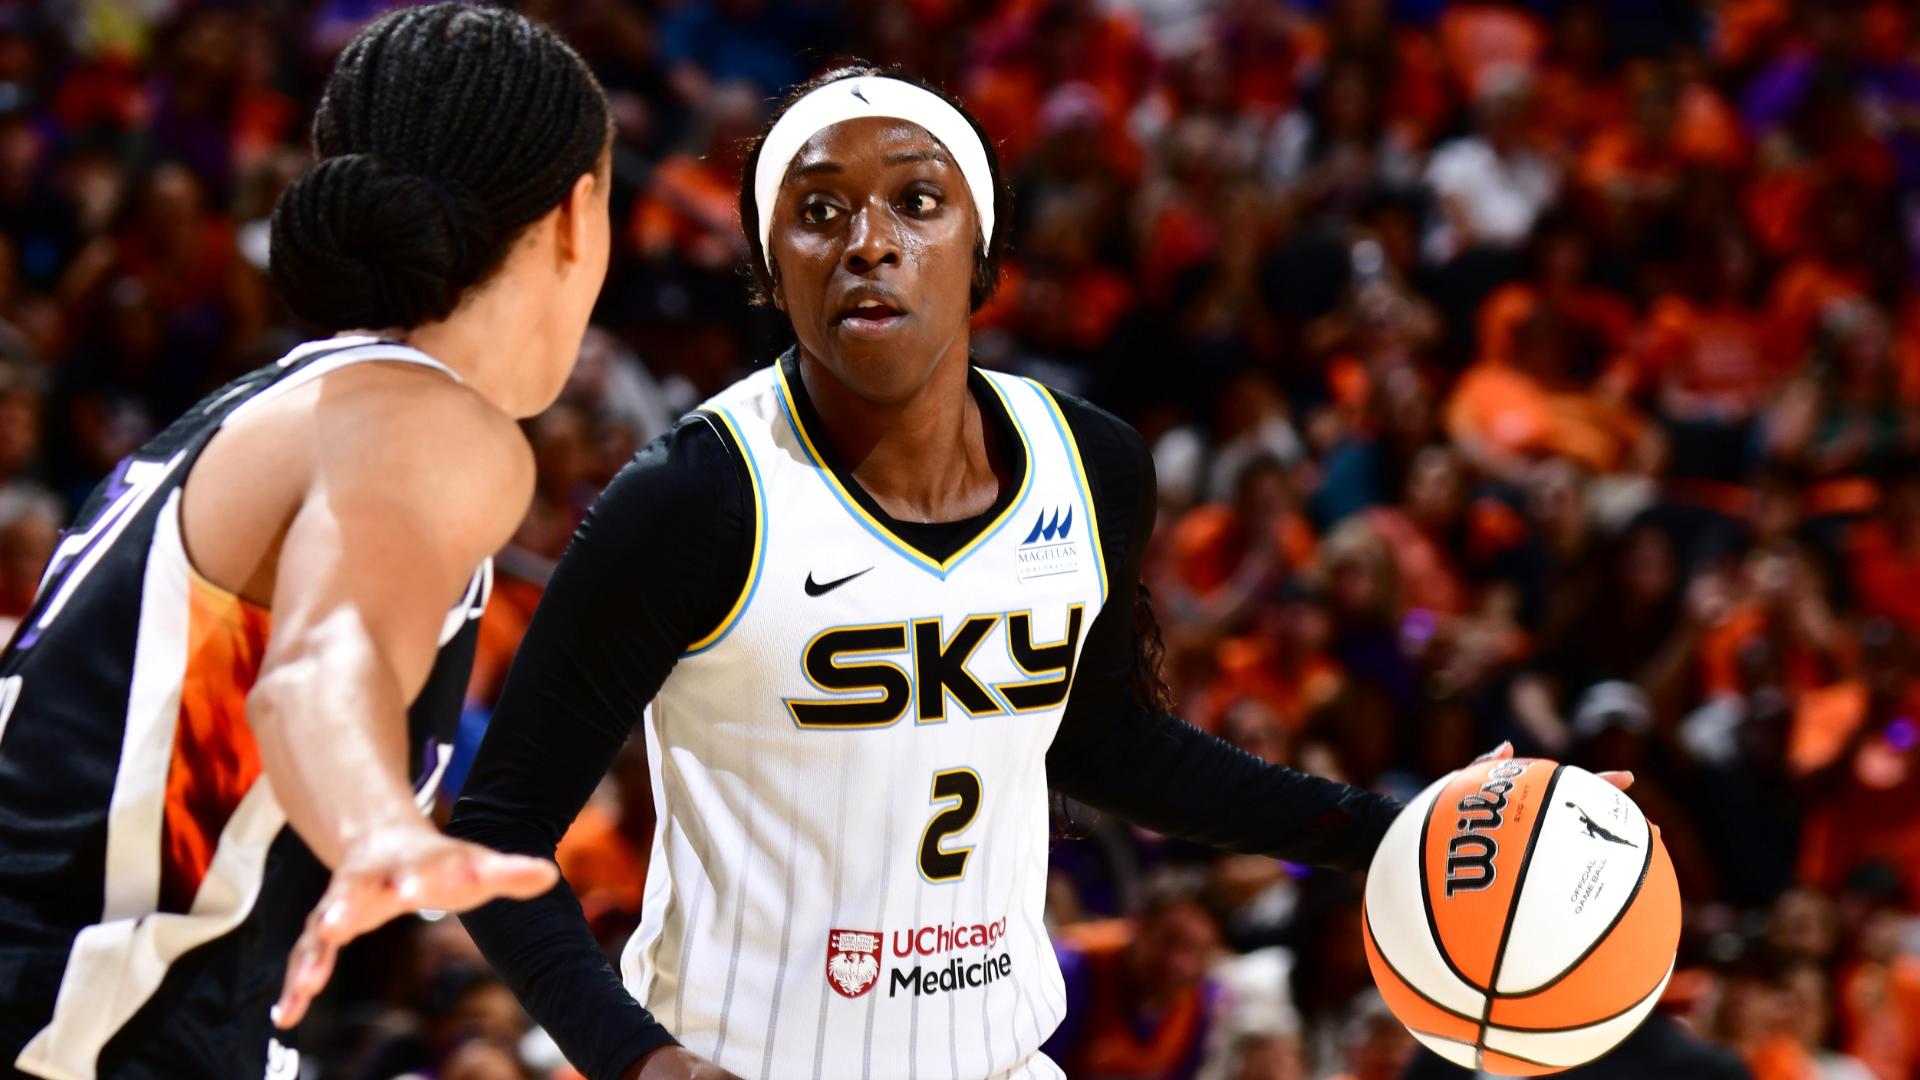 Chicago Sky spoil Griner's home debut with 75-69 win